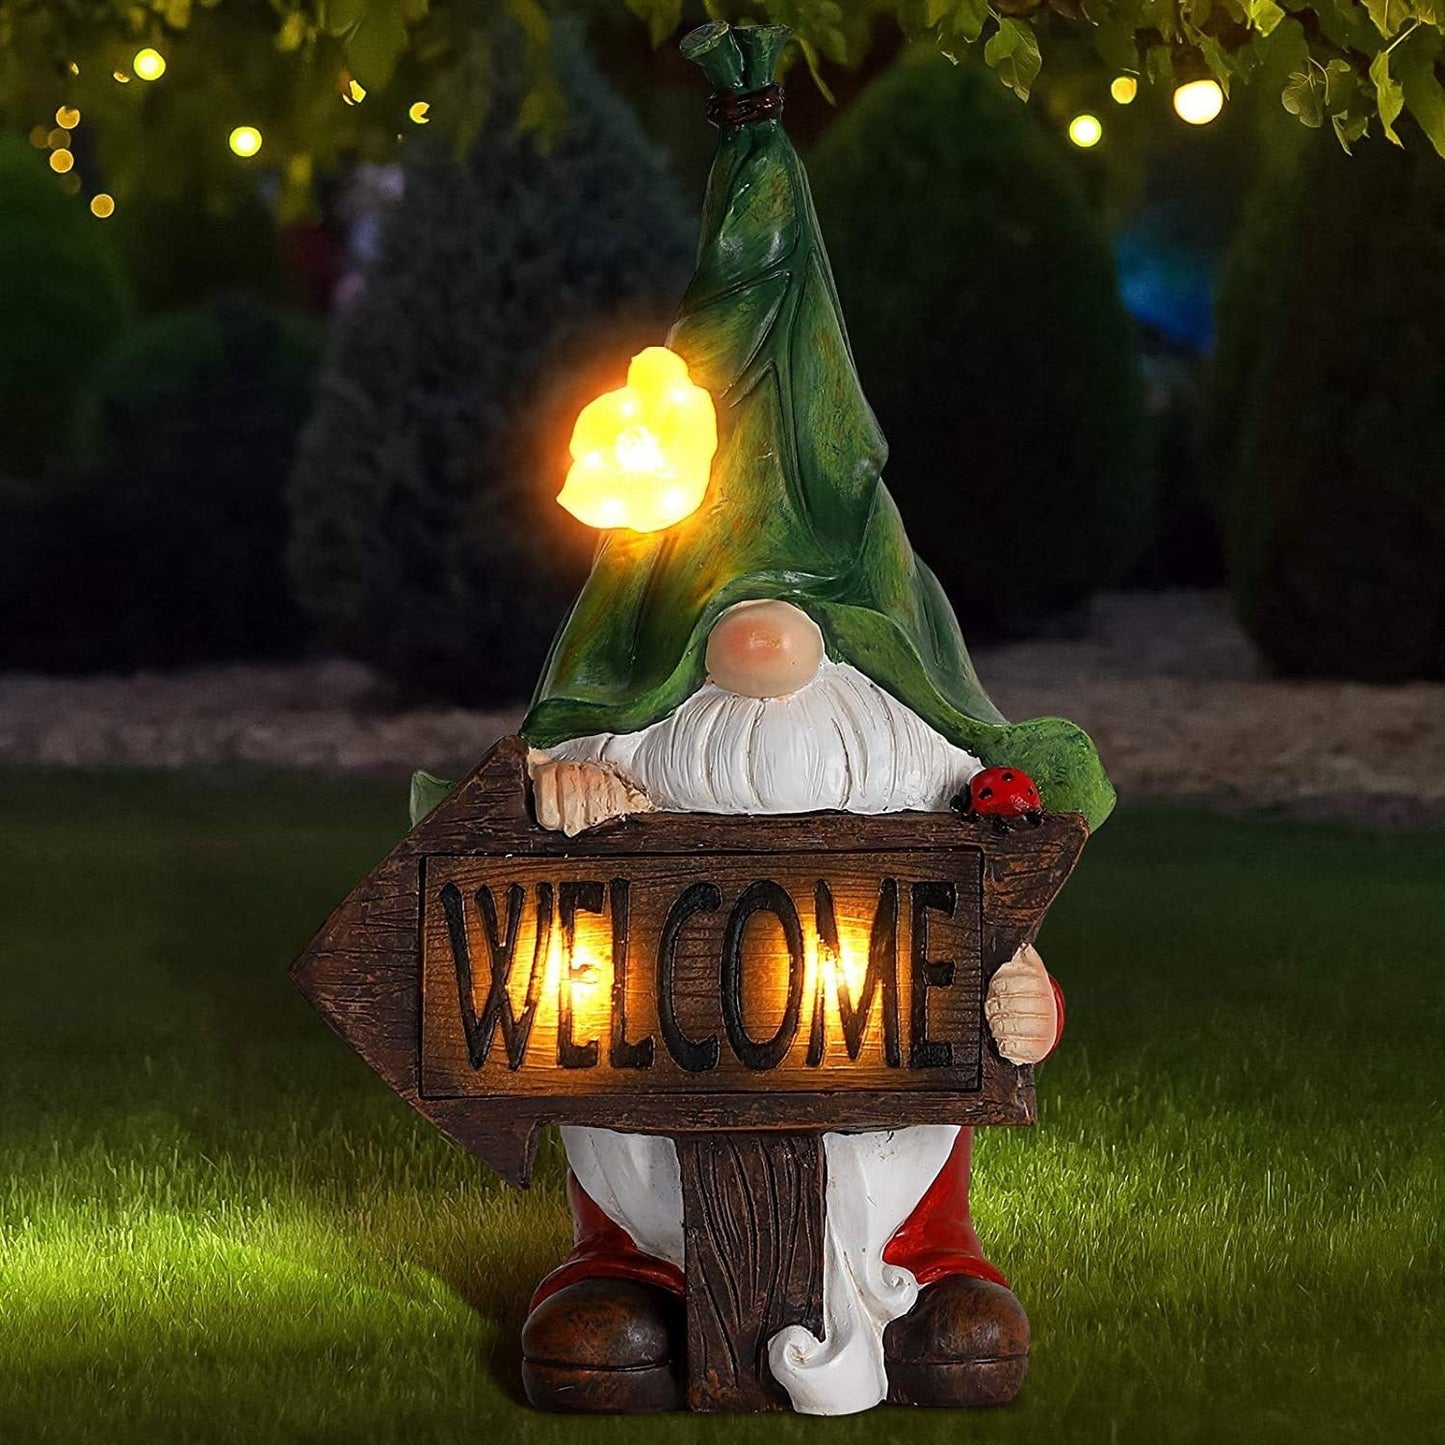 K Outdoor Garden Dwarf Statue-resin Dwarf Statue Carrying Magic Ball Solar Led Light Welcome Sign Gnome Yard Lawn Large Figurine